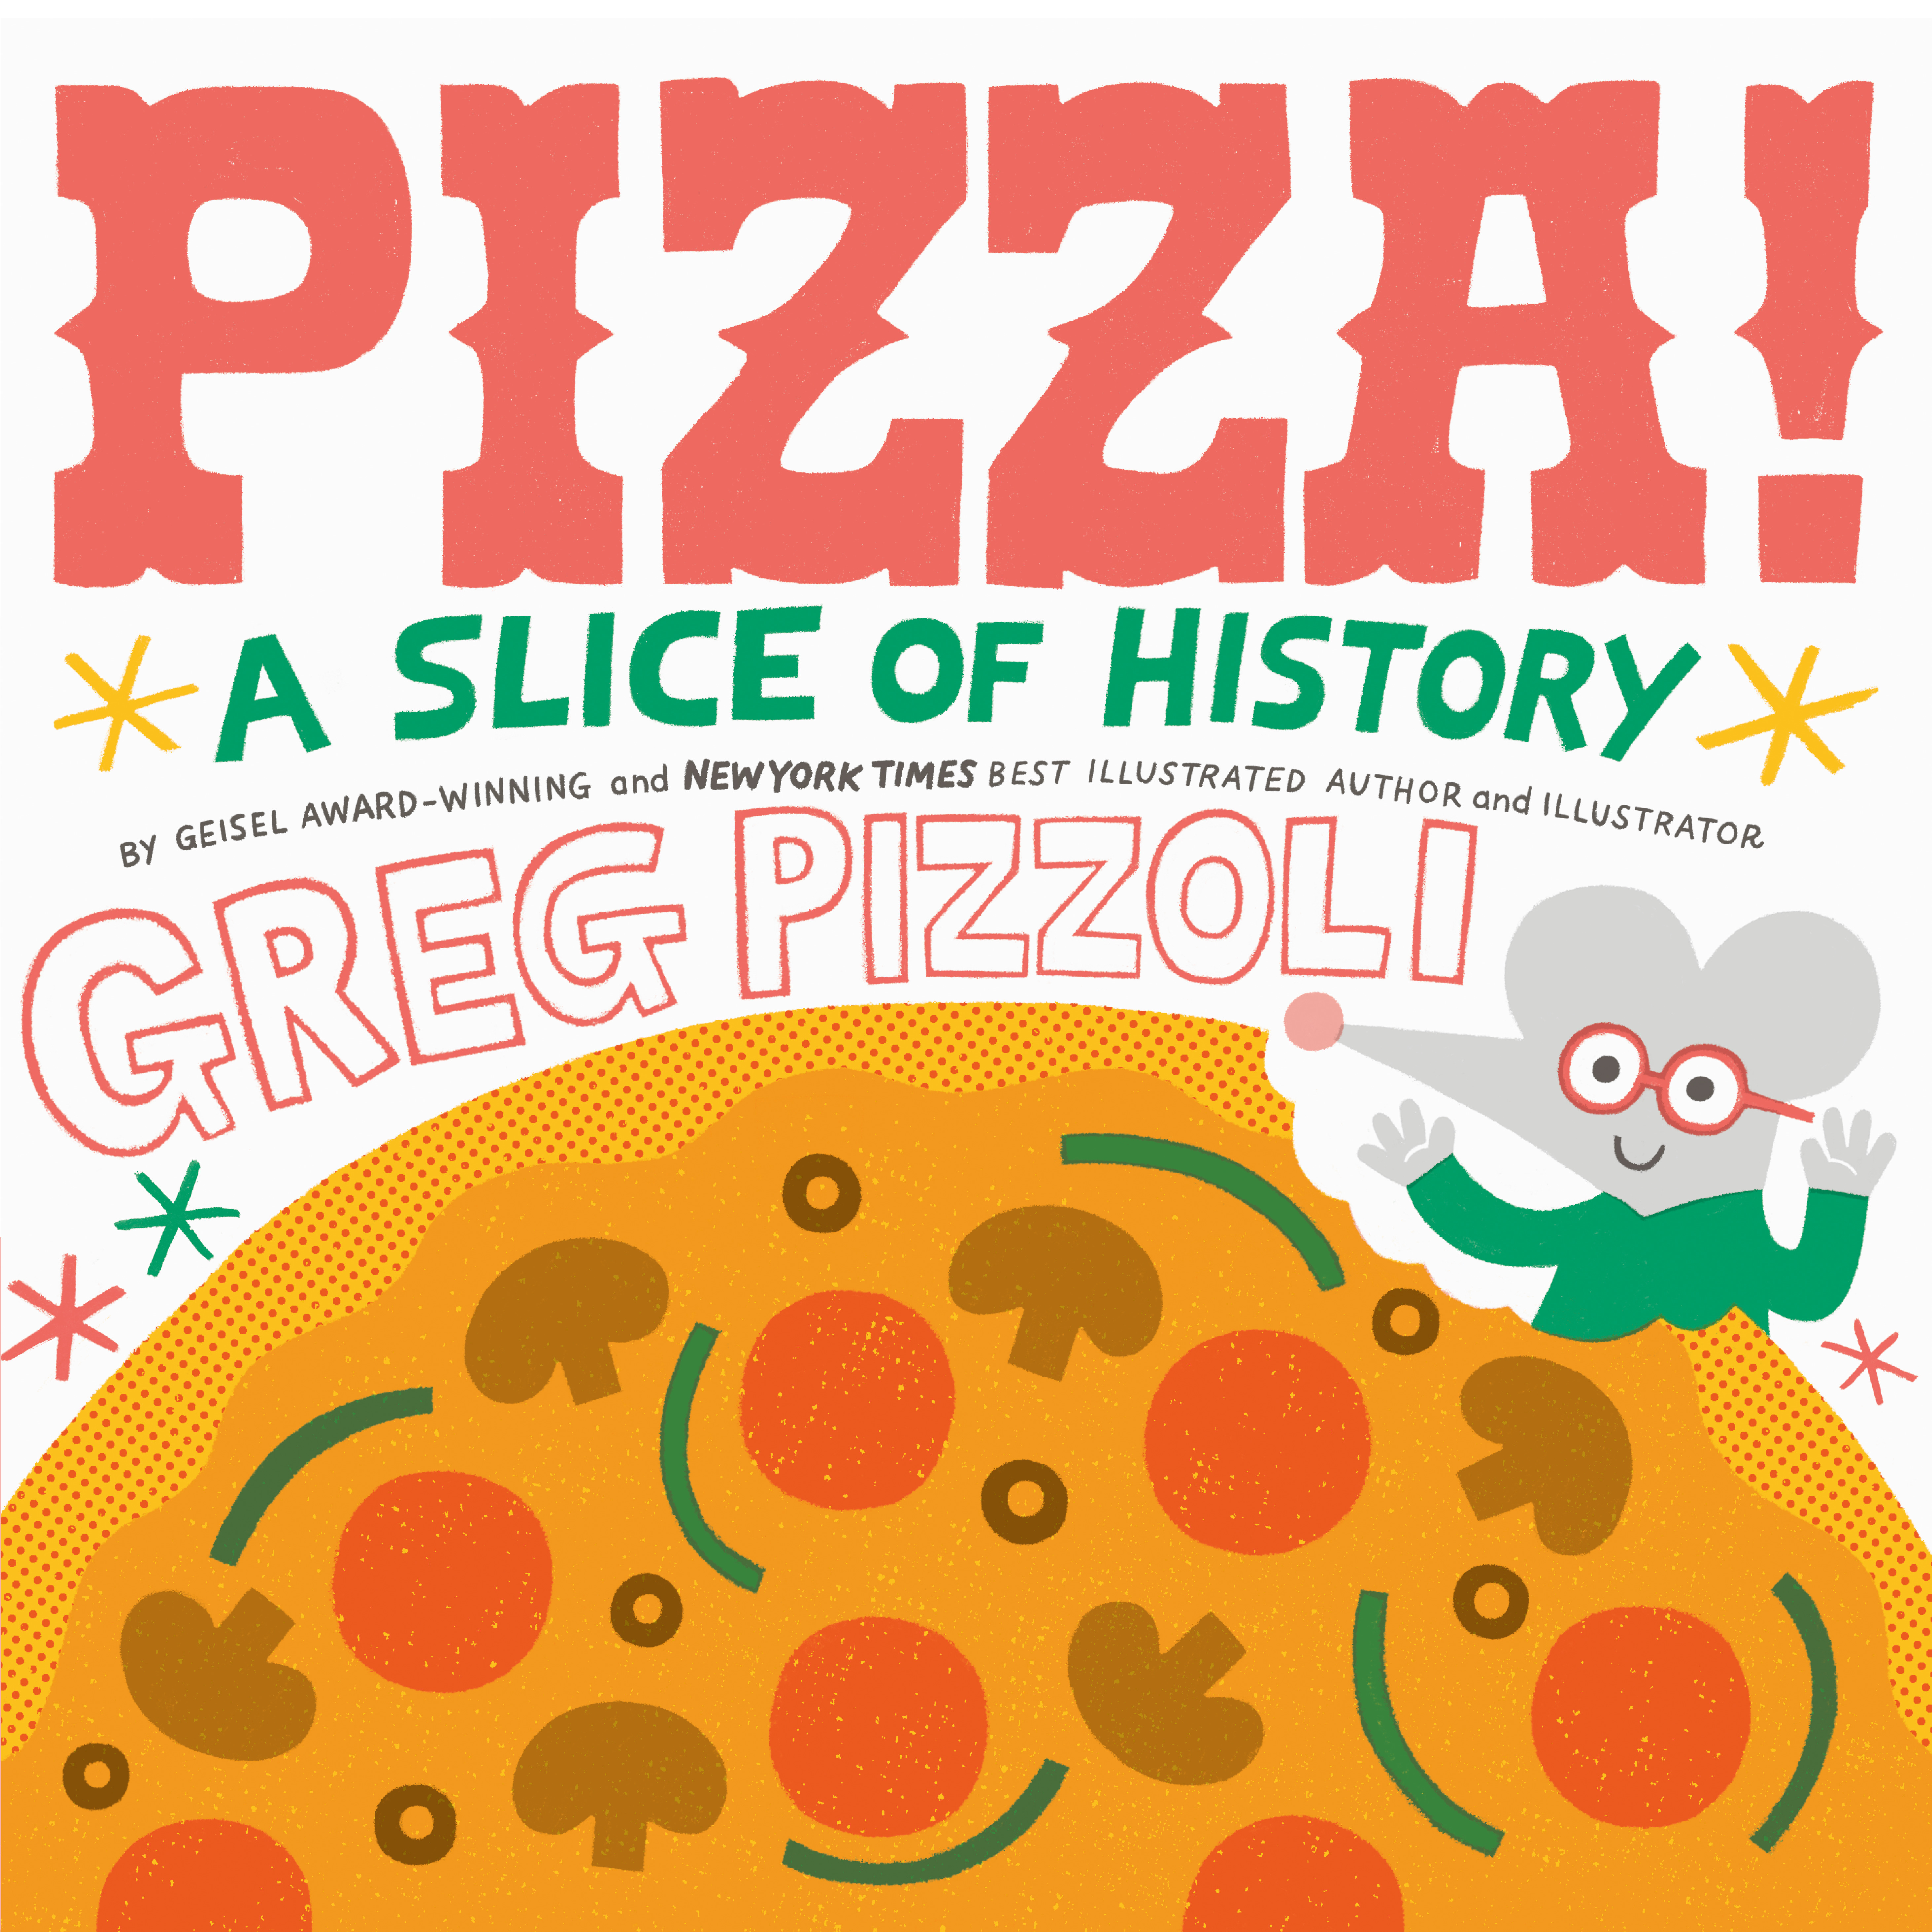 Pizza! : A Slice of History | Pizzoli, Greg